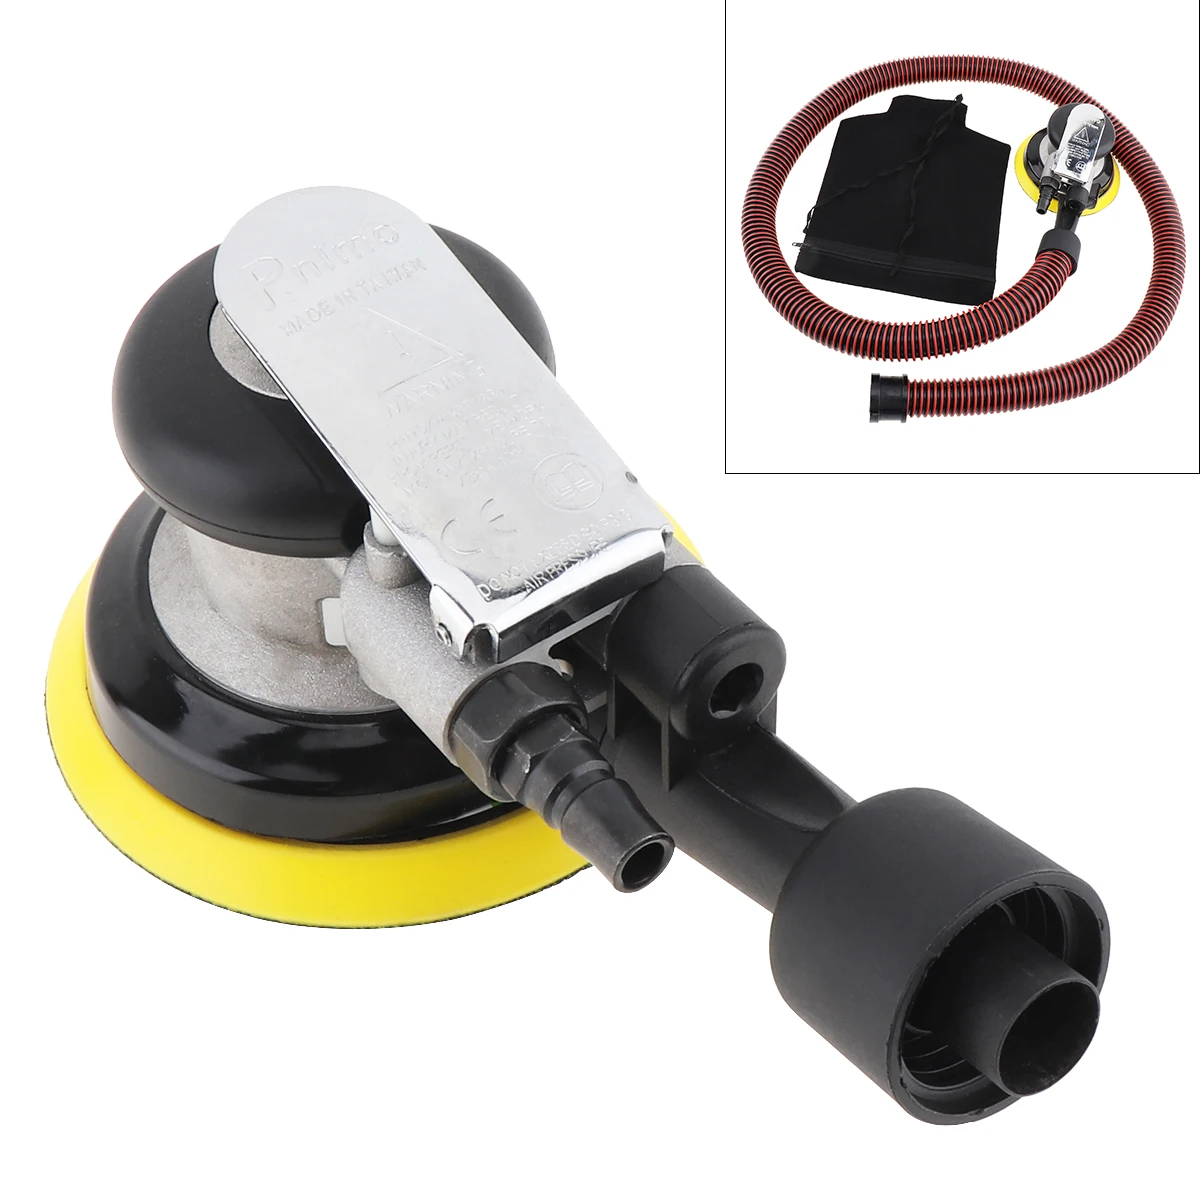 

5Inch Vacuuming Pneumatic Grinder 12000RPM High Speed Vacuum Sander Machine with 1.5m Air Tube 6-Hole Sanding Pad for Polishing